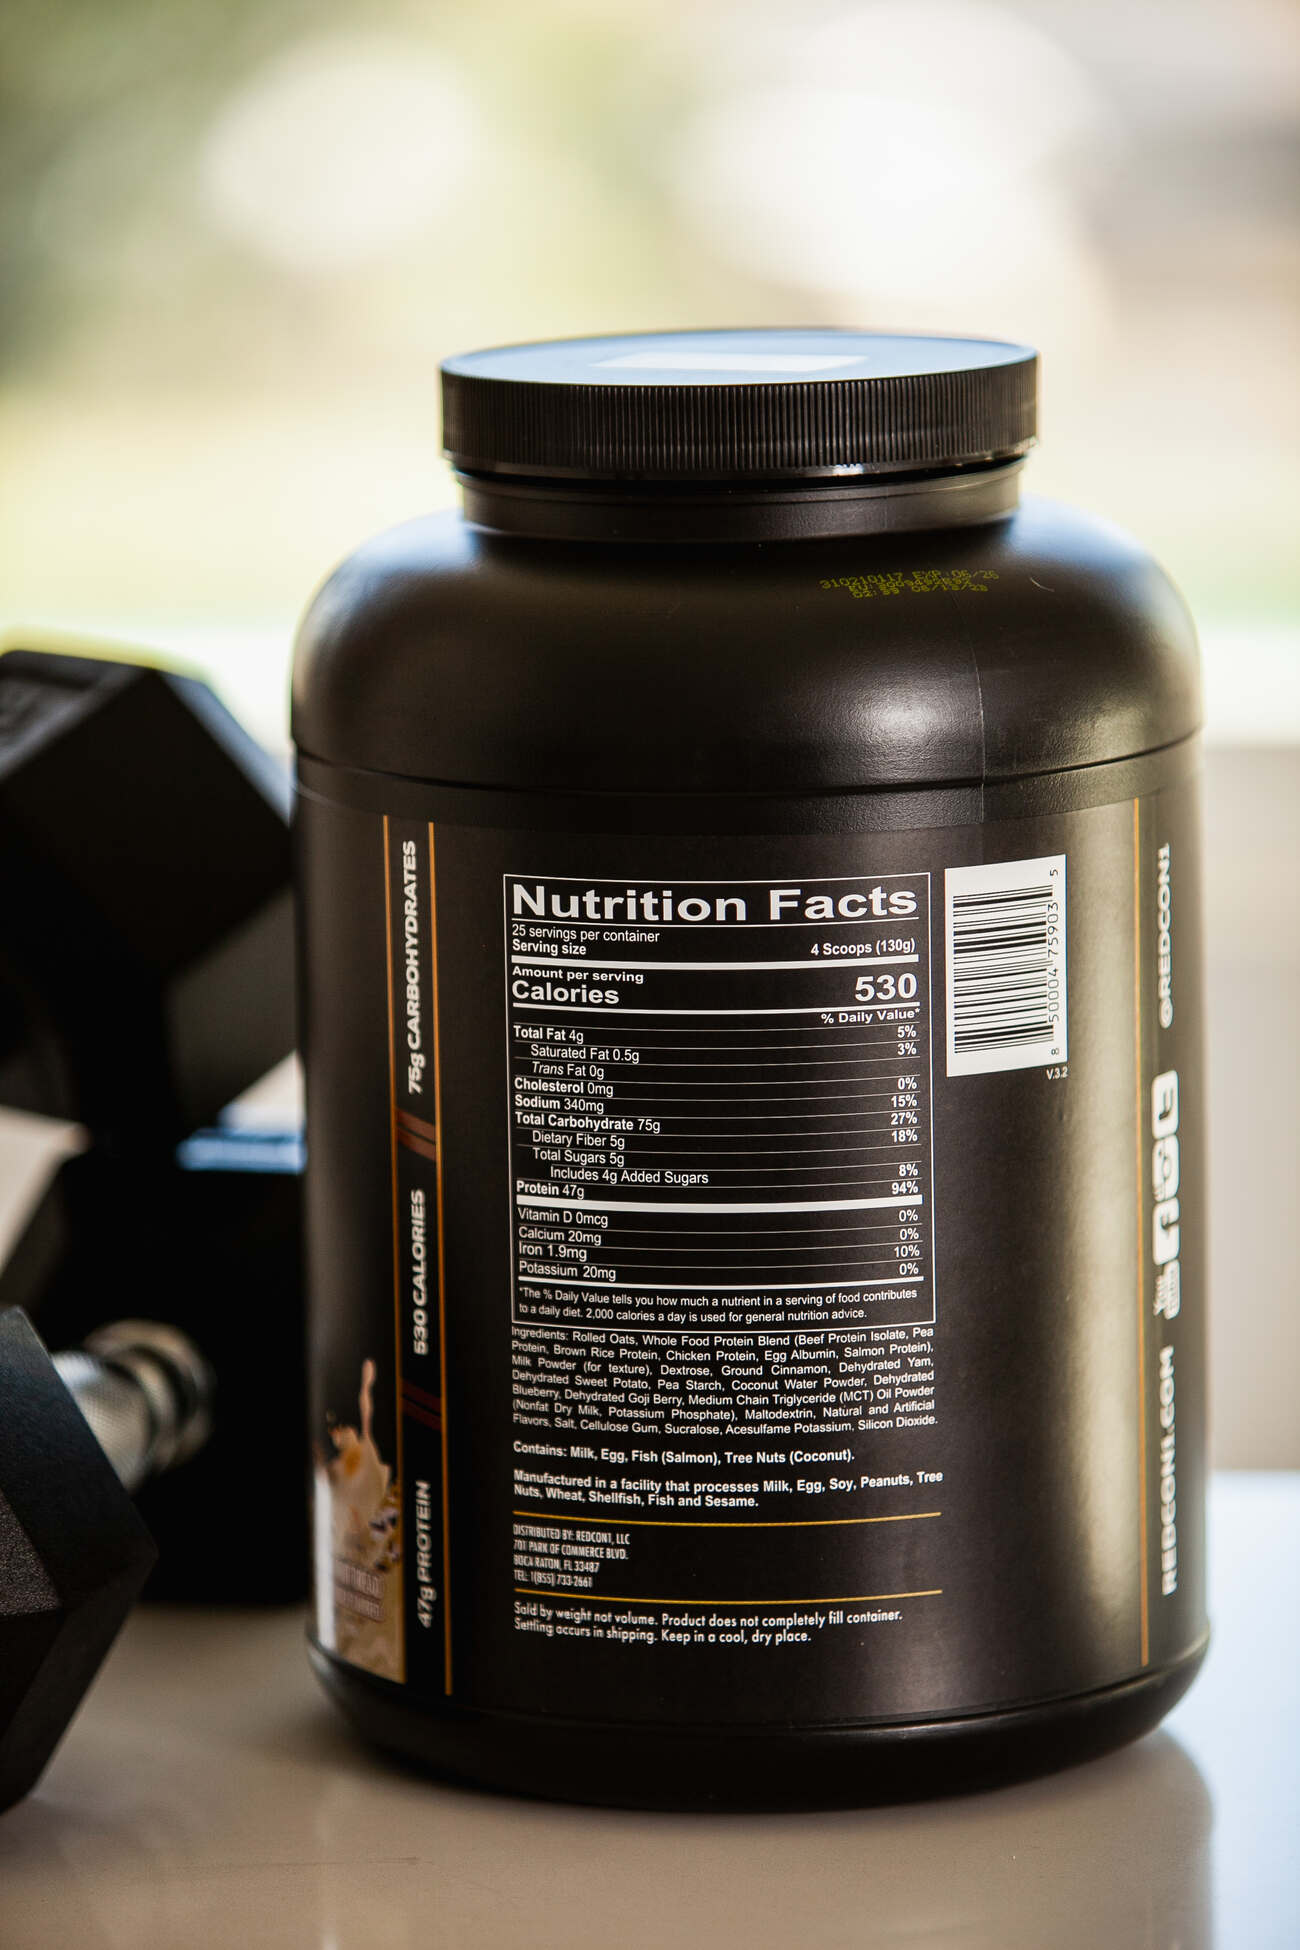 A close-up of the nutritional label on the back of a black container of Redcon1 MRE Whole Food Protein, detailing the calorie content and ingredients, with a dumbbell in the blurred background